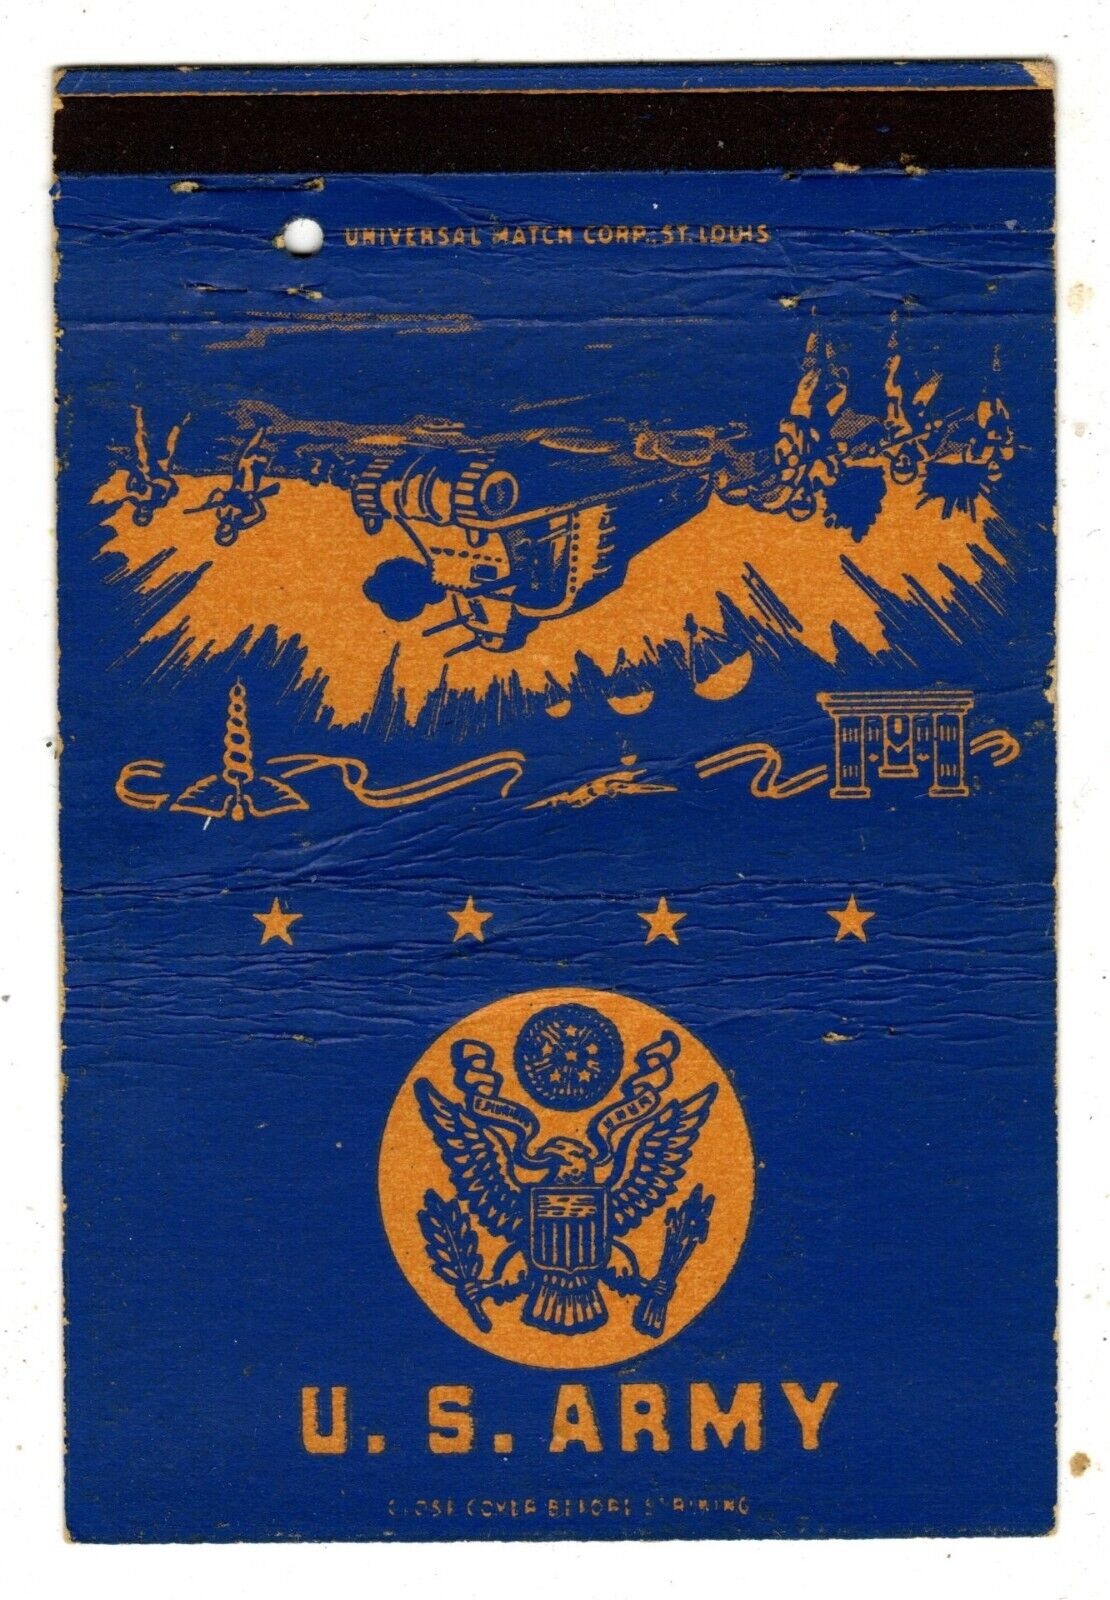 UNITED STATES ARMY matchbook matchcover - MILITARY - WORLD WAR II